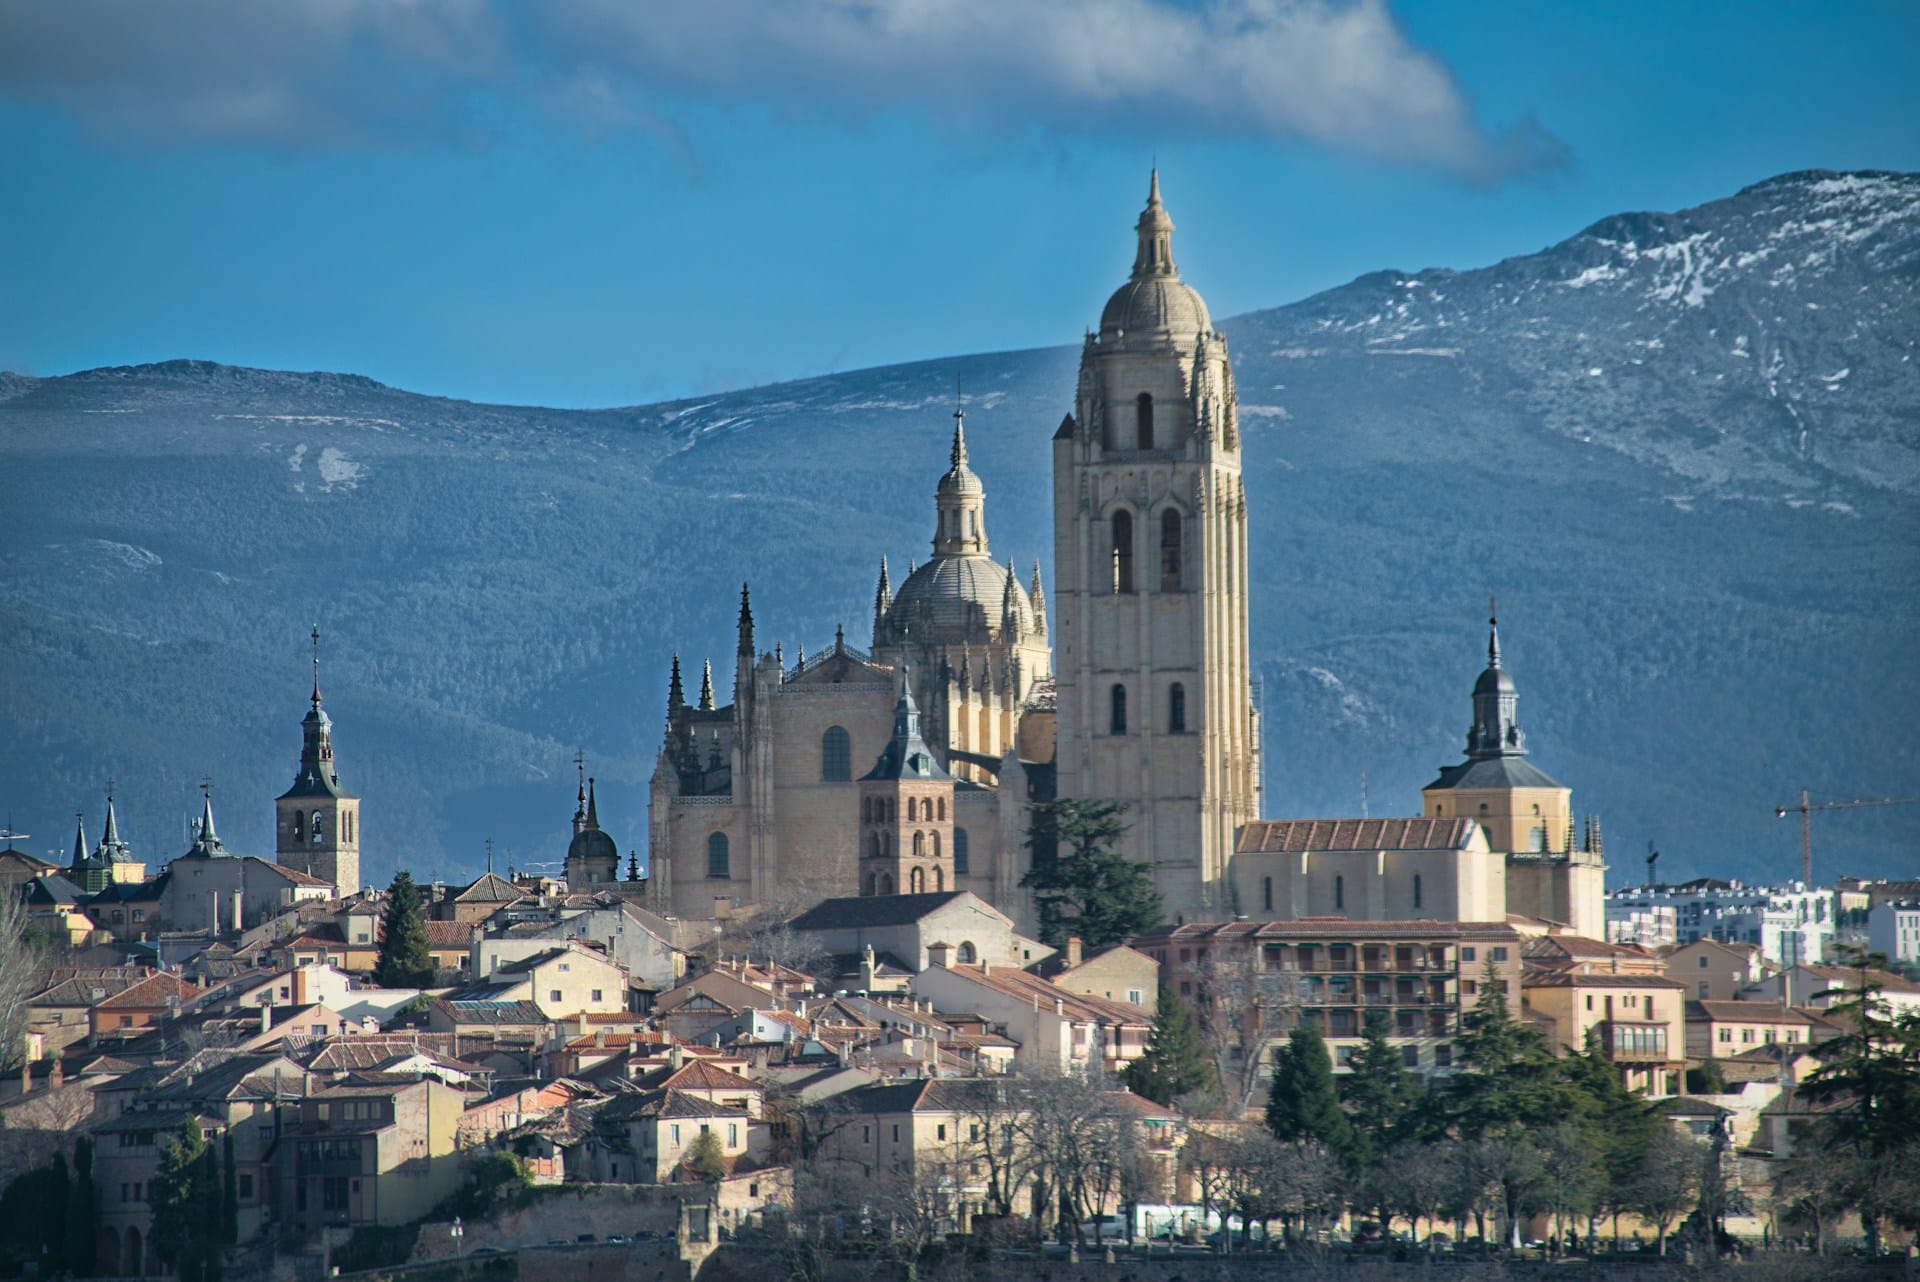 View of the Segovia Cathedral